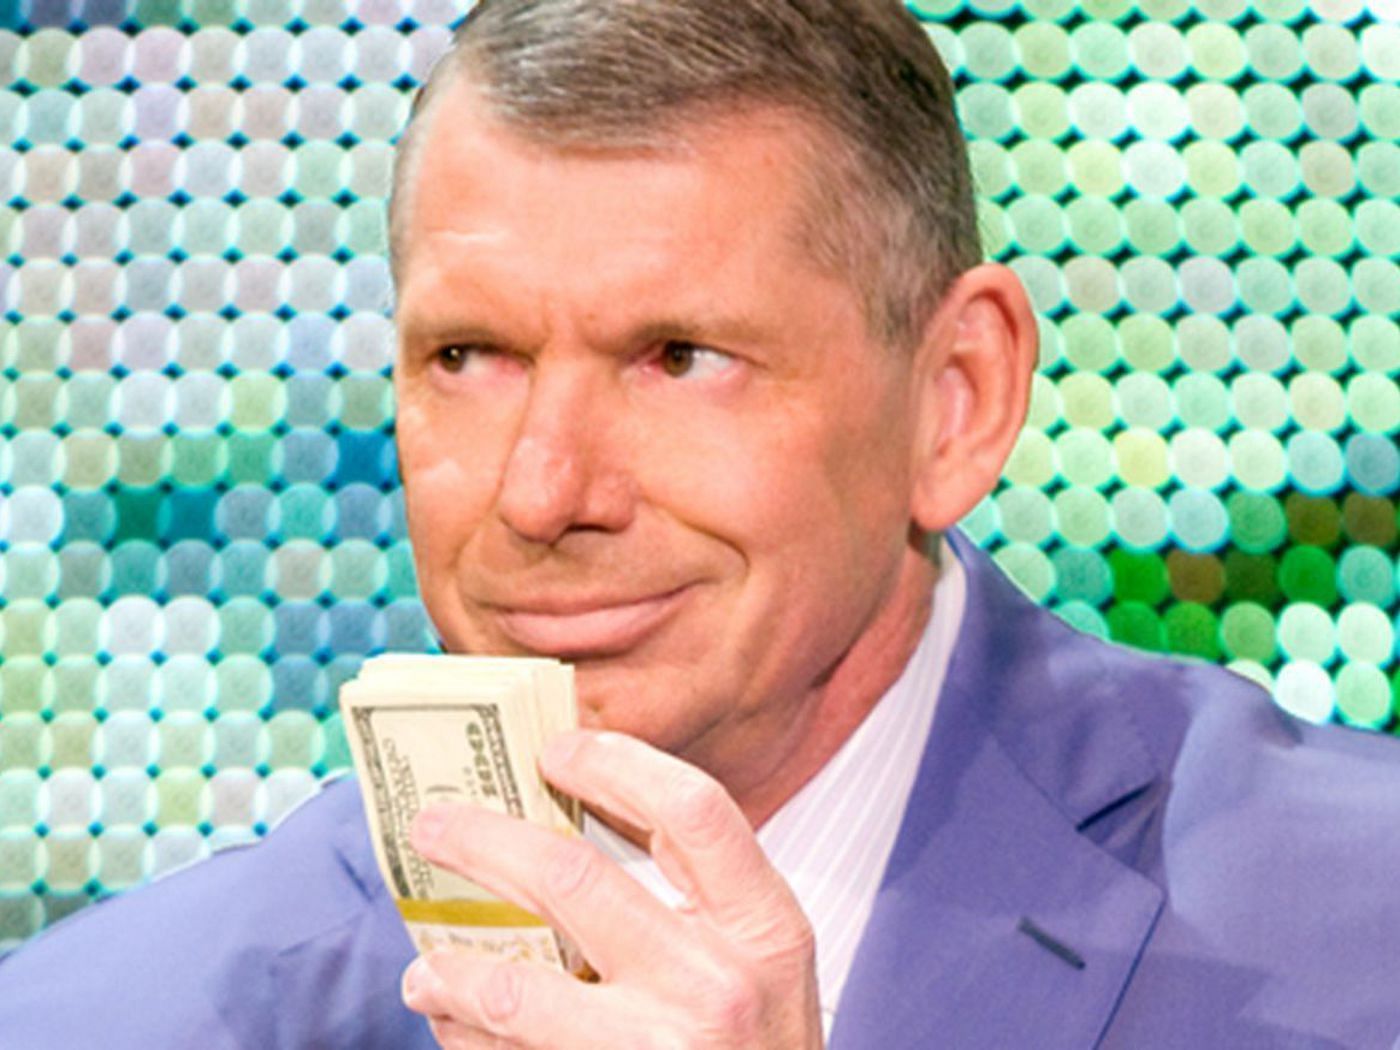 Vince McMahon still owns WWE shares despite retiring from all positions in the company